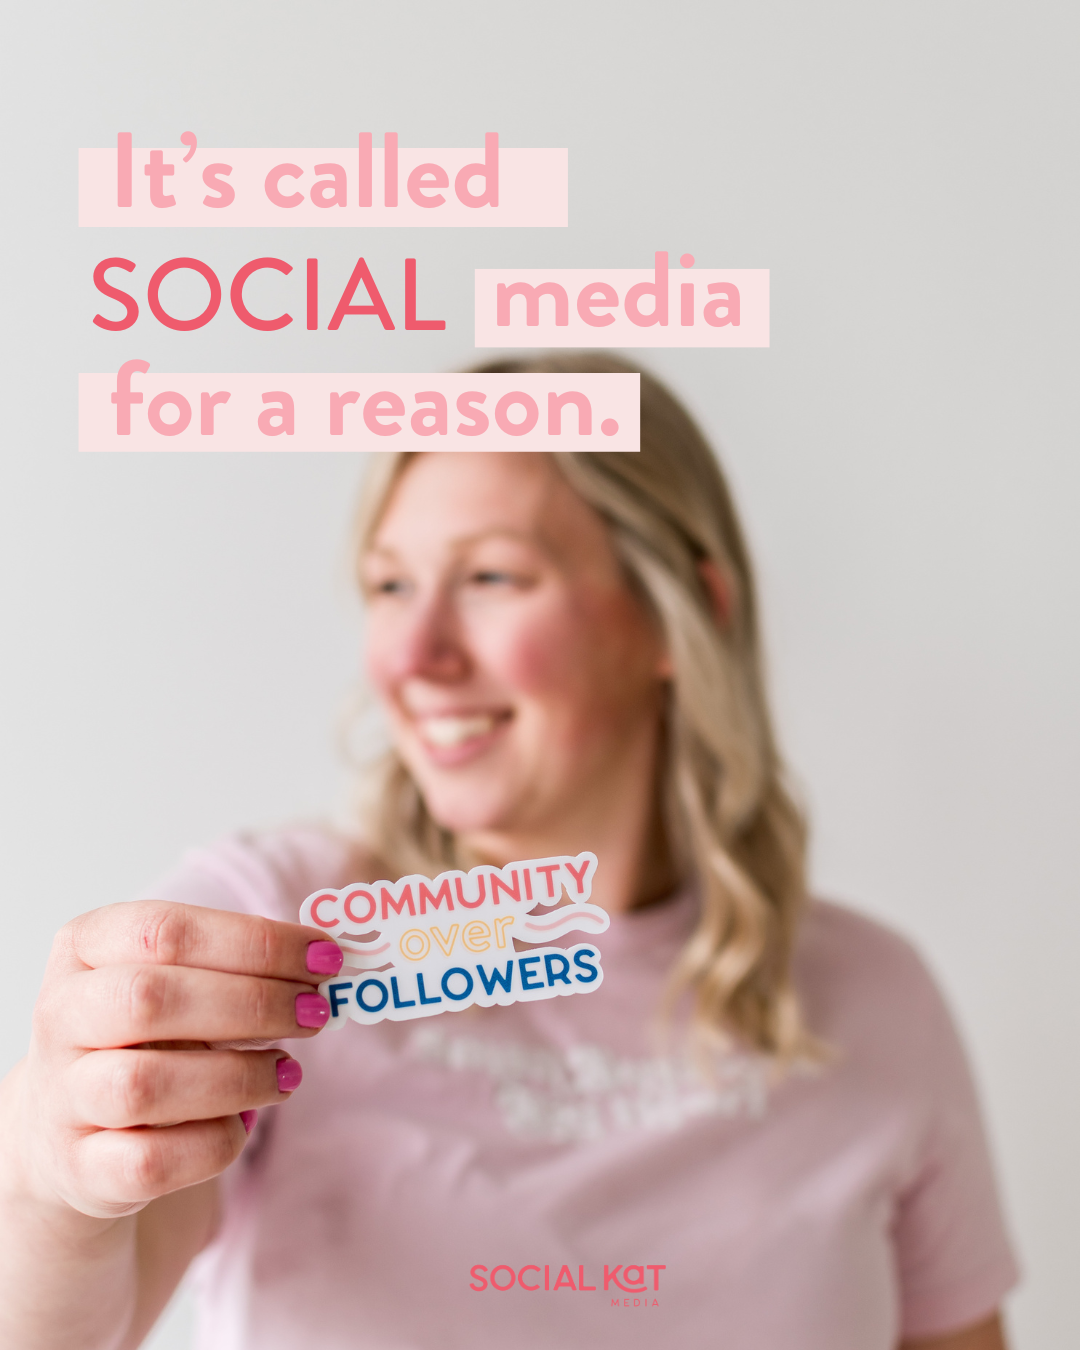 It's called SOCIAL media for a reason. A woman stands, out of focus in the background. She is holding a sticker that says "Community over followers."